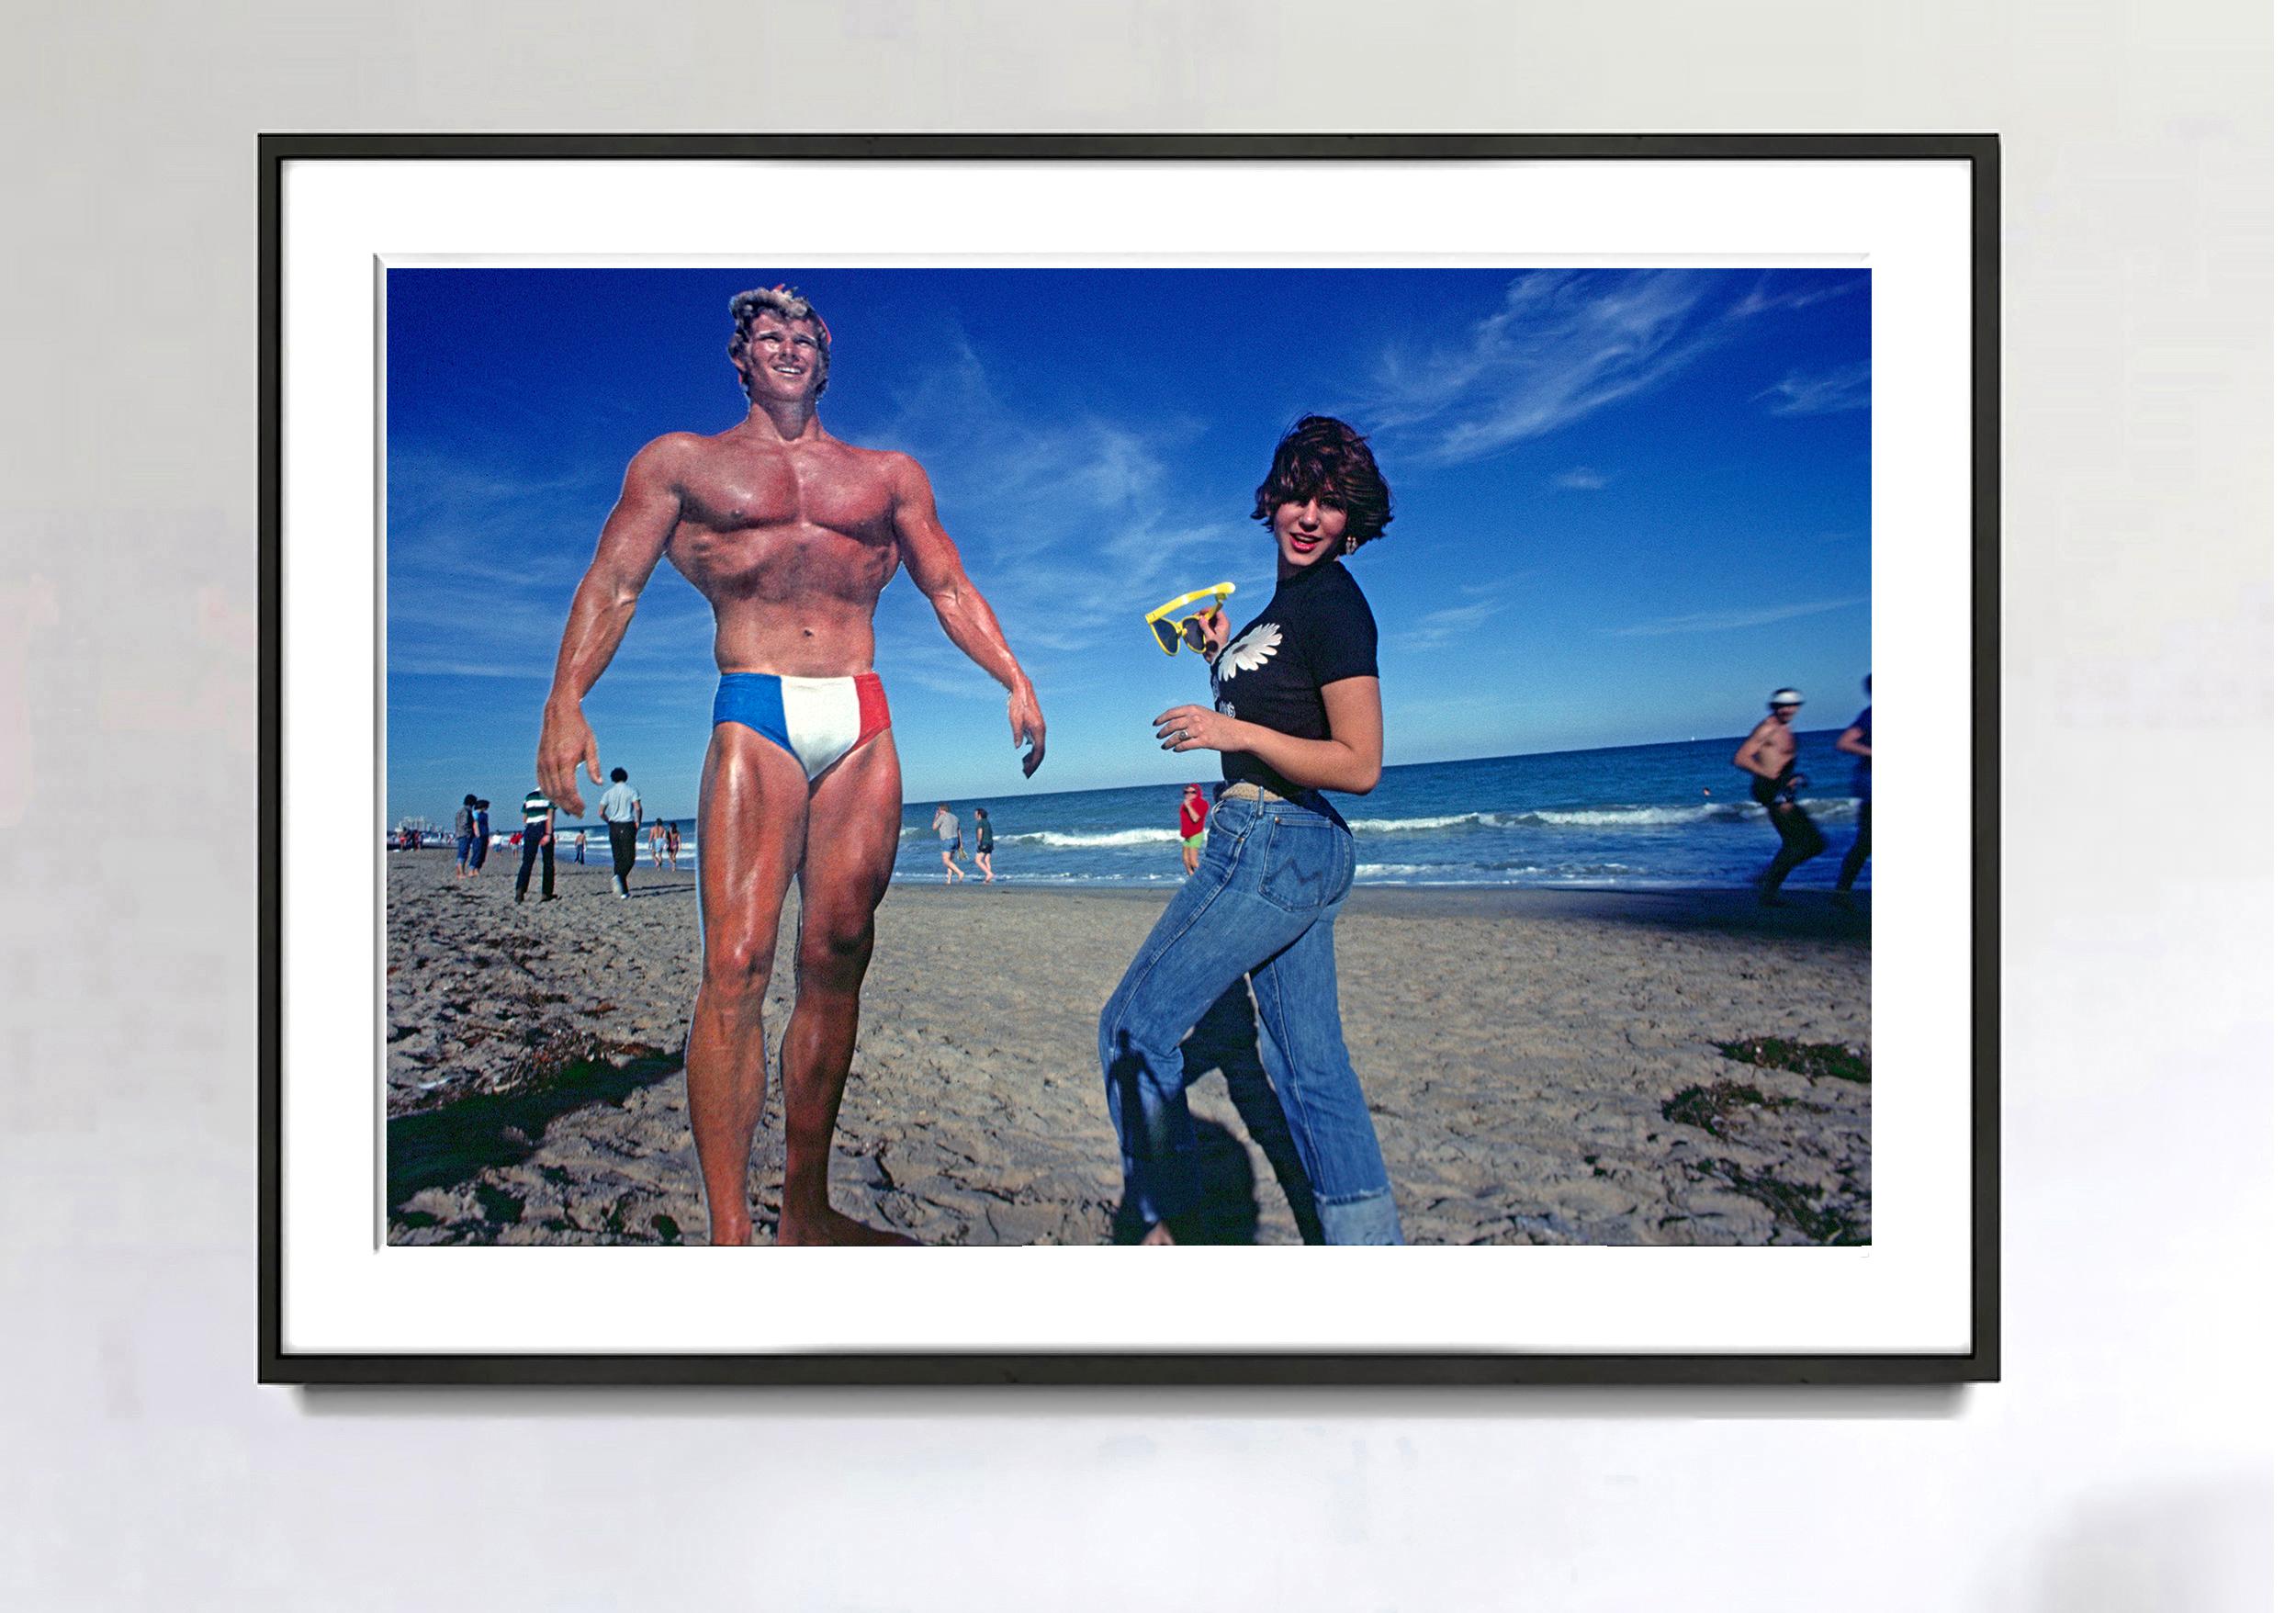 A ripped muscleman strikes the pose with an admiring female bystander who holds an oversized pair of prank sunglasses. In reality, the muscleman is a 5-inch cut-out, and the girl is lifesize. Notice the small cast shadow on the bottom of the